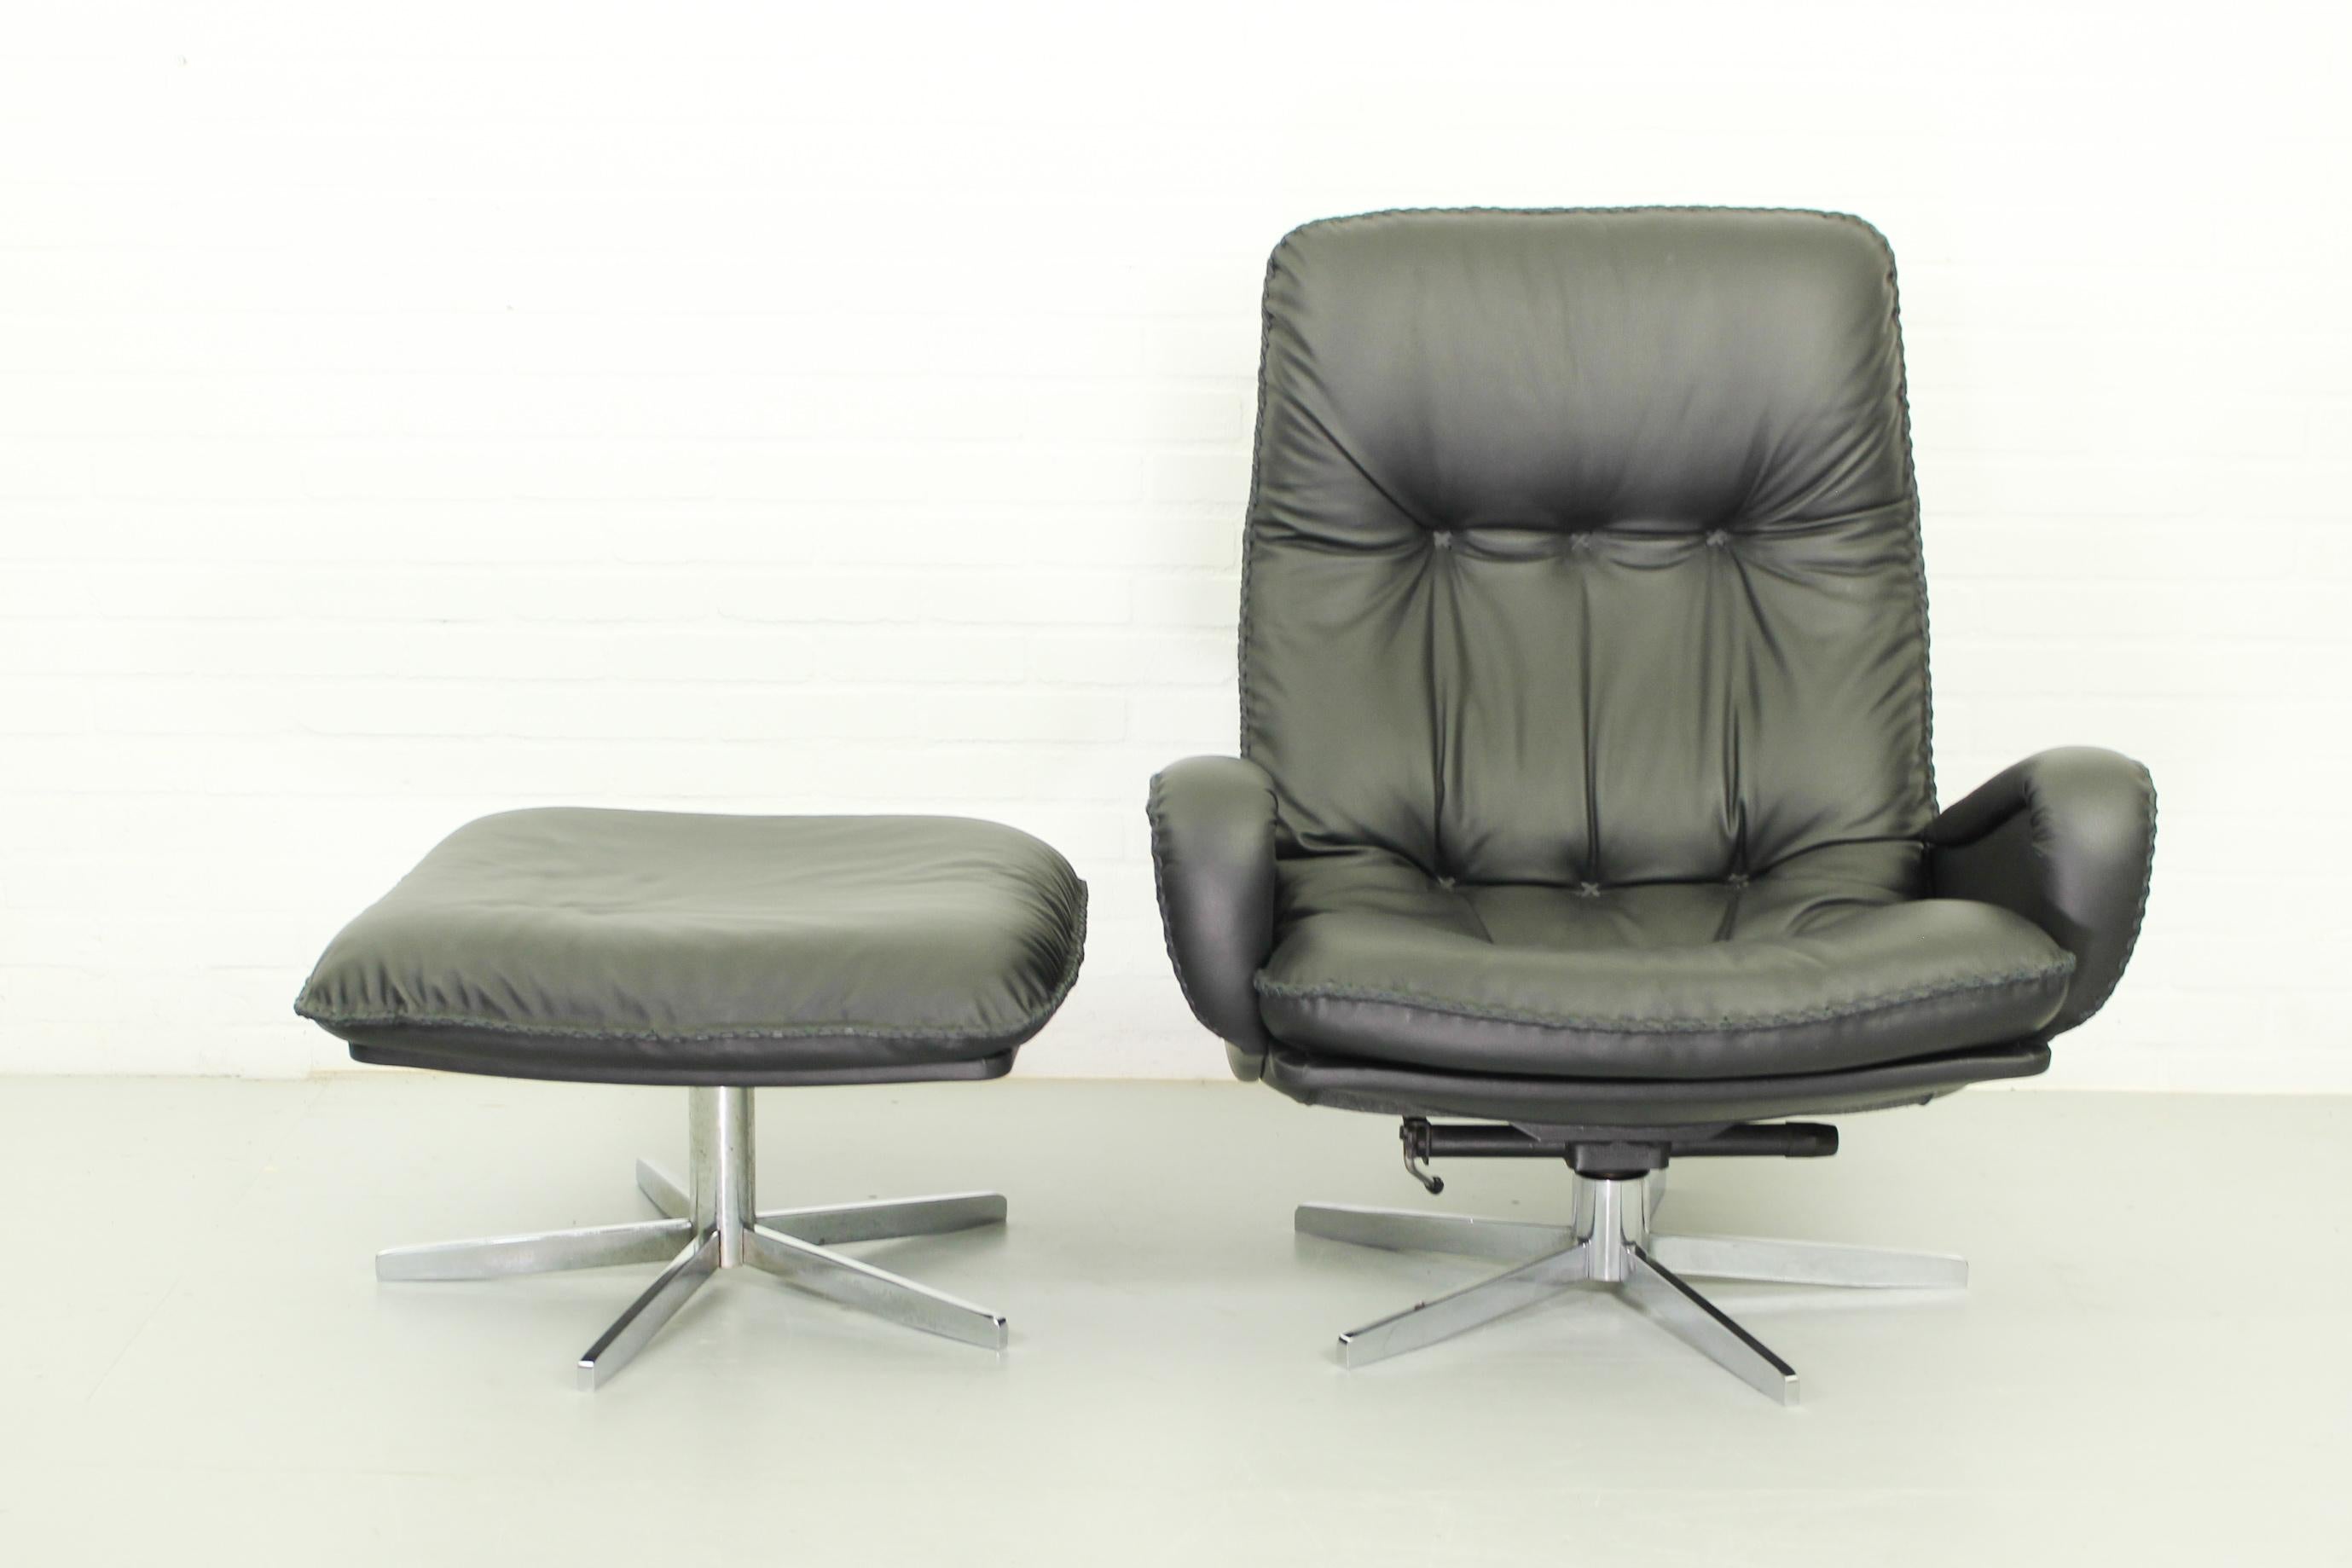 20th Century Ds231 James Bond Highback Swivel Chair and Matching Ottoman by De Sede Switzerla For Sale